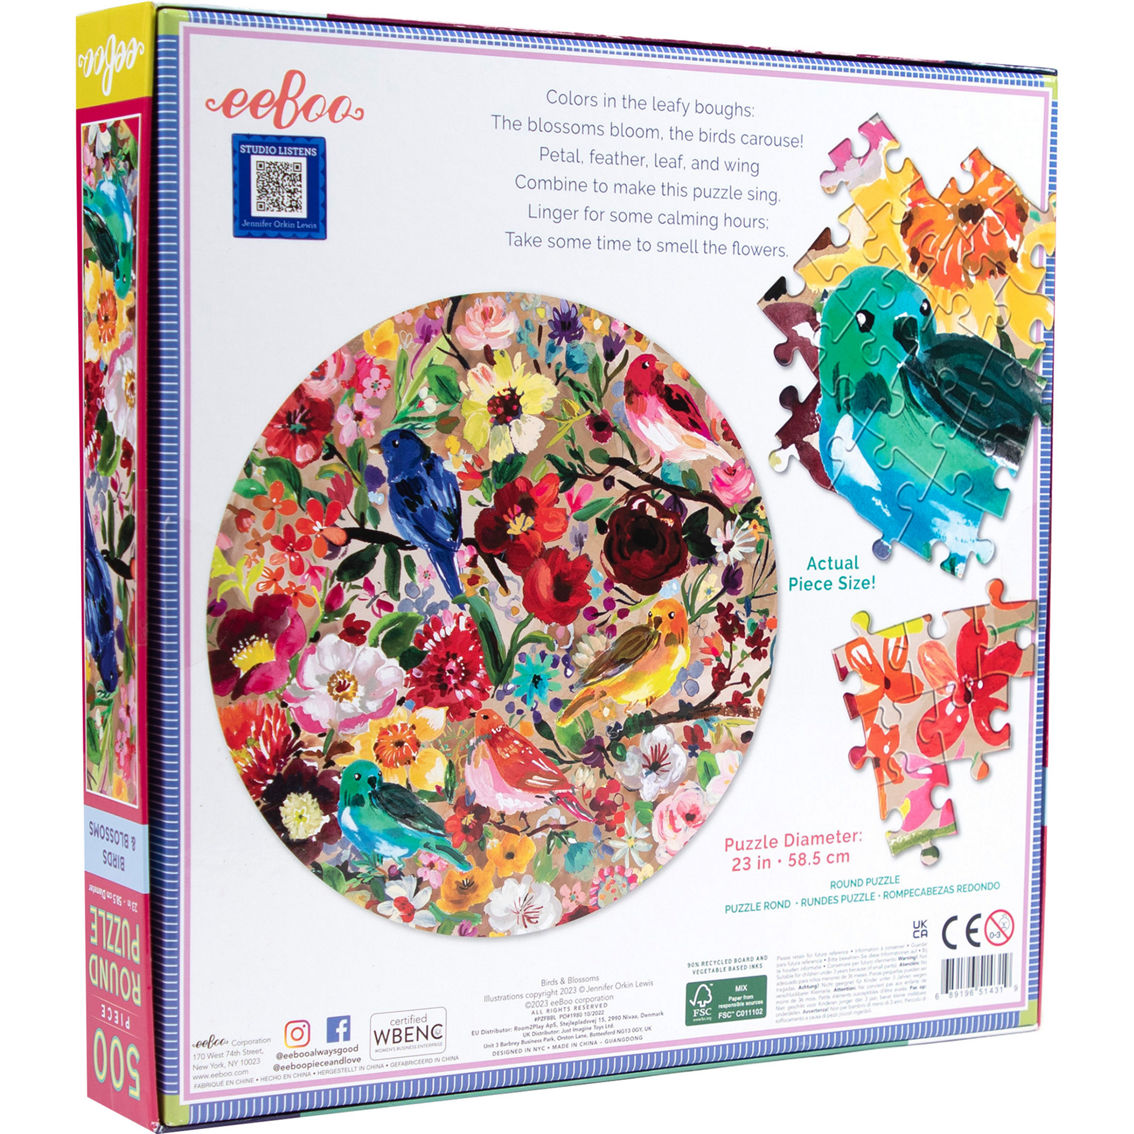 eeBoo Piece and Love Birds & Blossoms 500 Piece Round Jigsaw Puzzle - Image 2 of 3